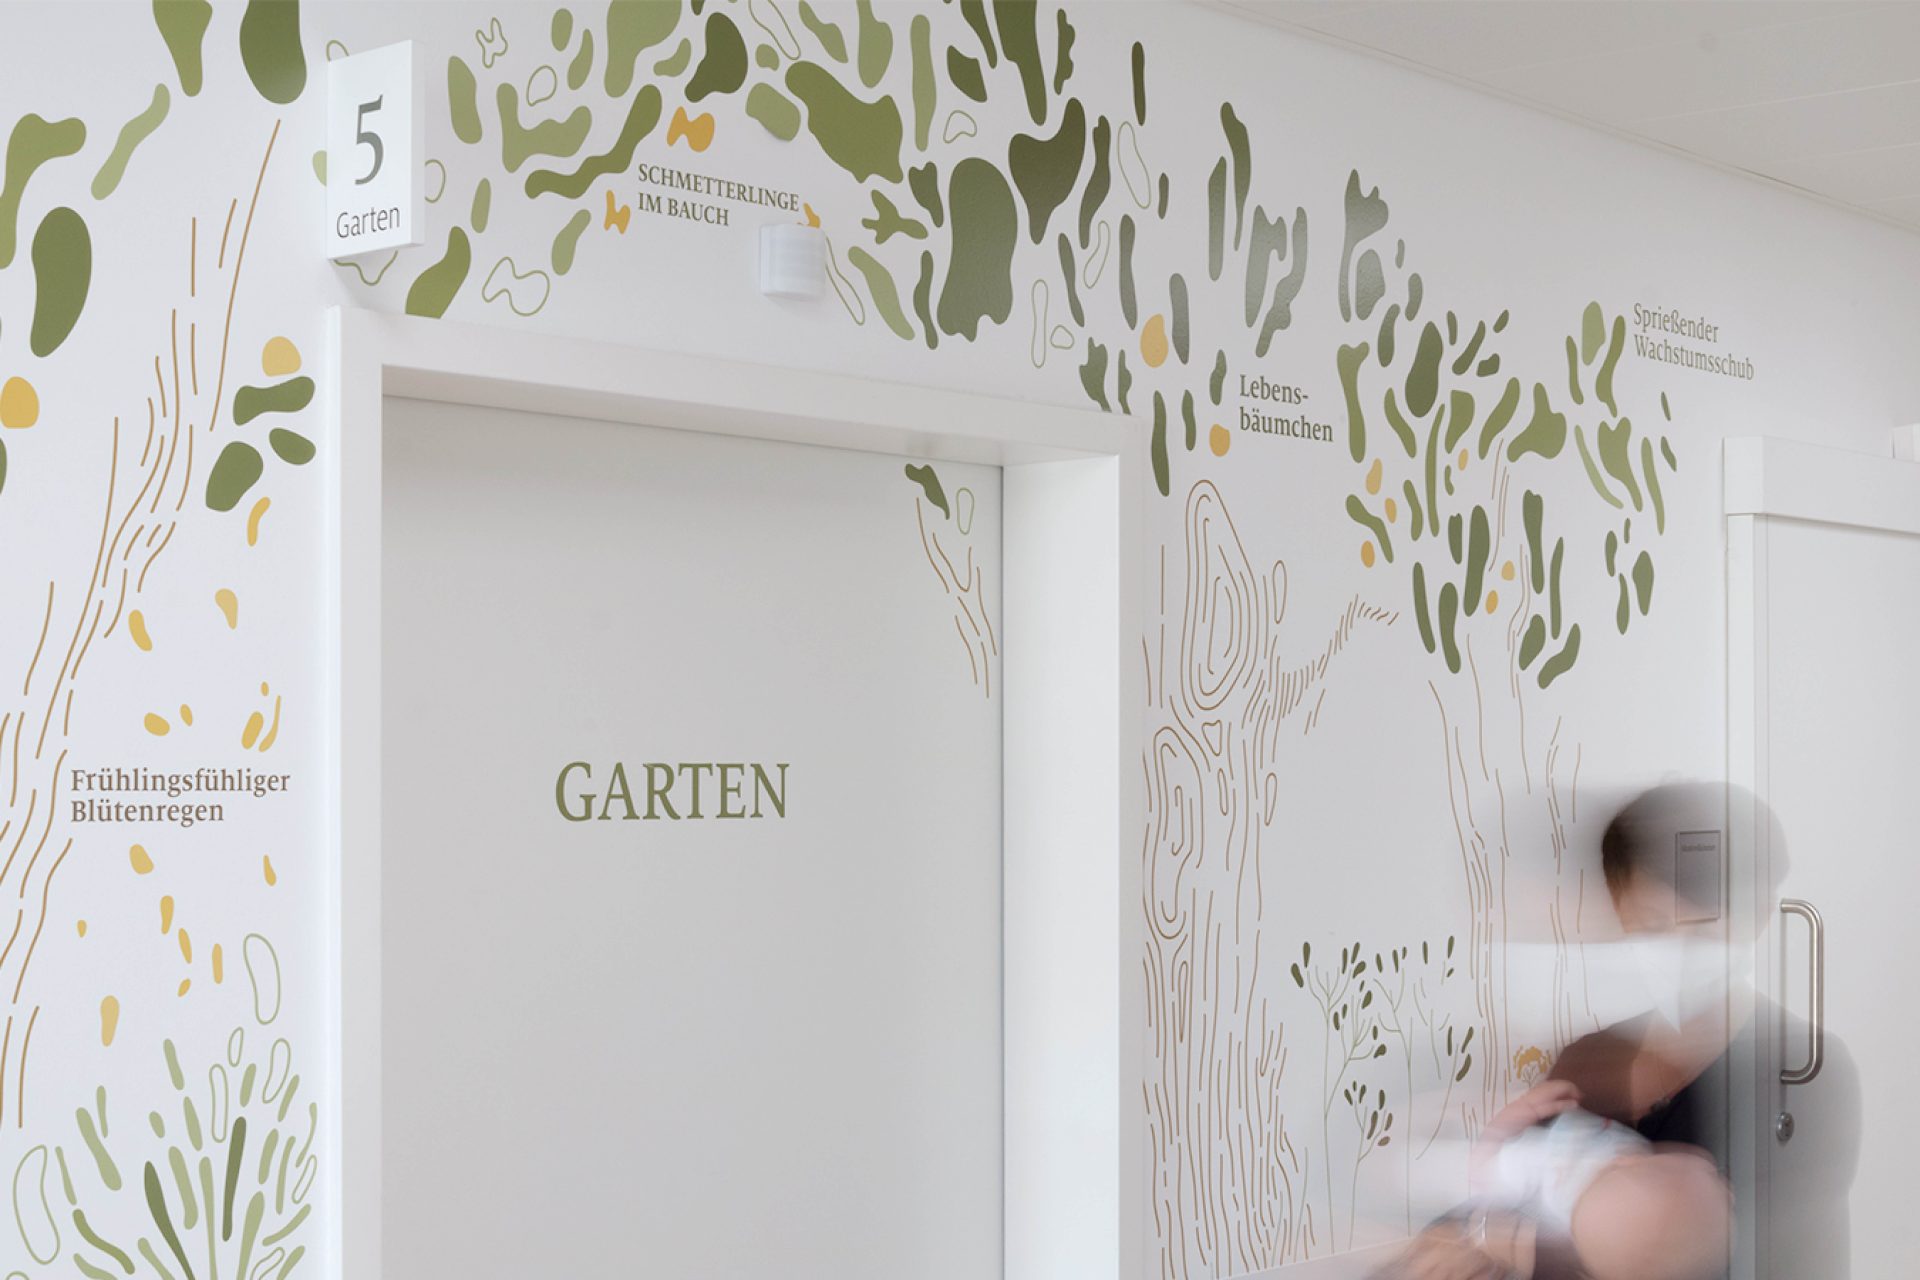 Door to birth room with name garden and matching illustration & lettering all around 